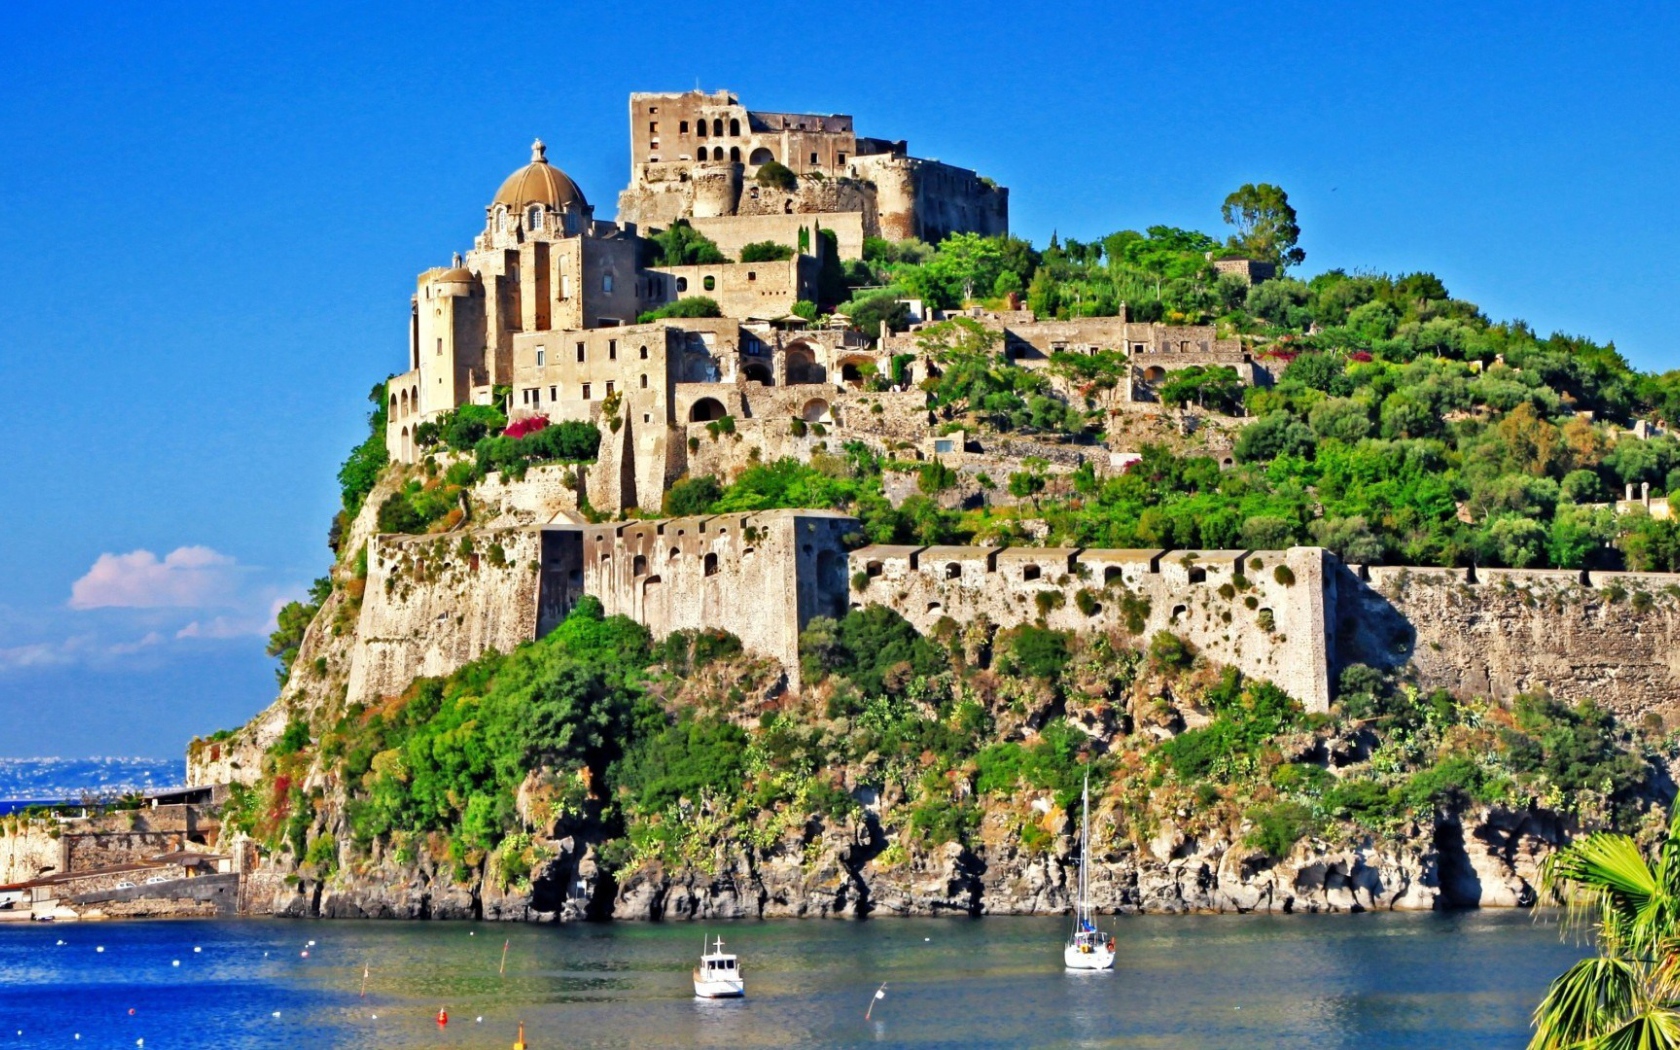 Castle on a rock on the island of Ischia, Italy